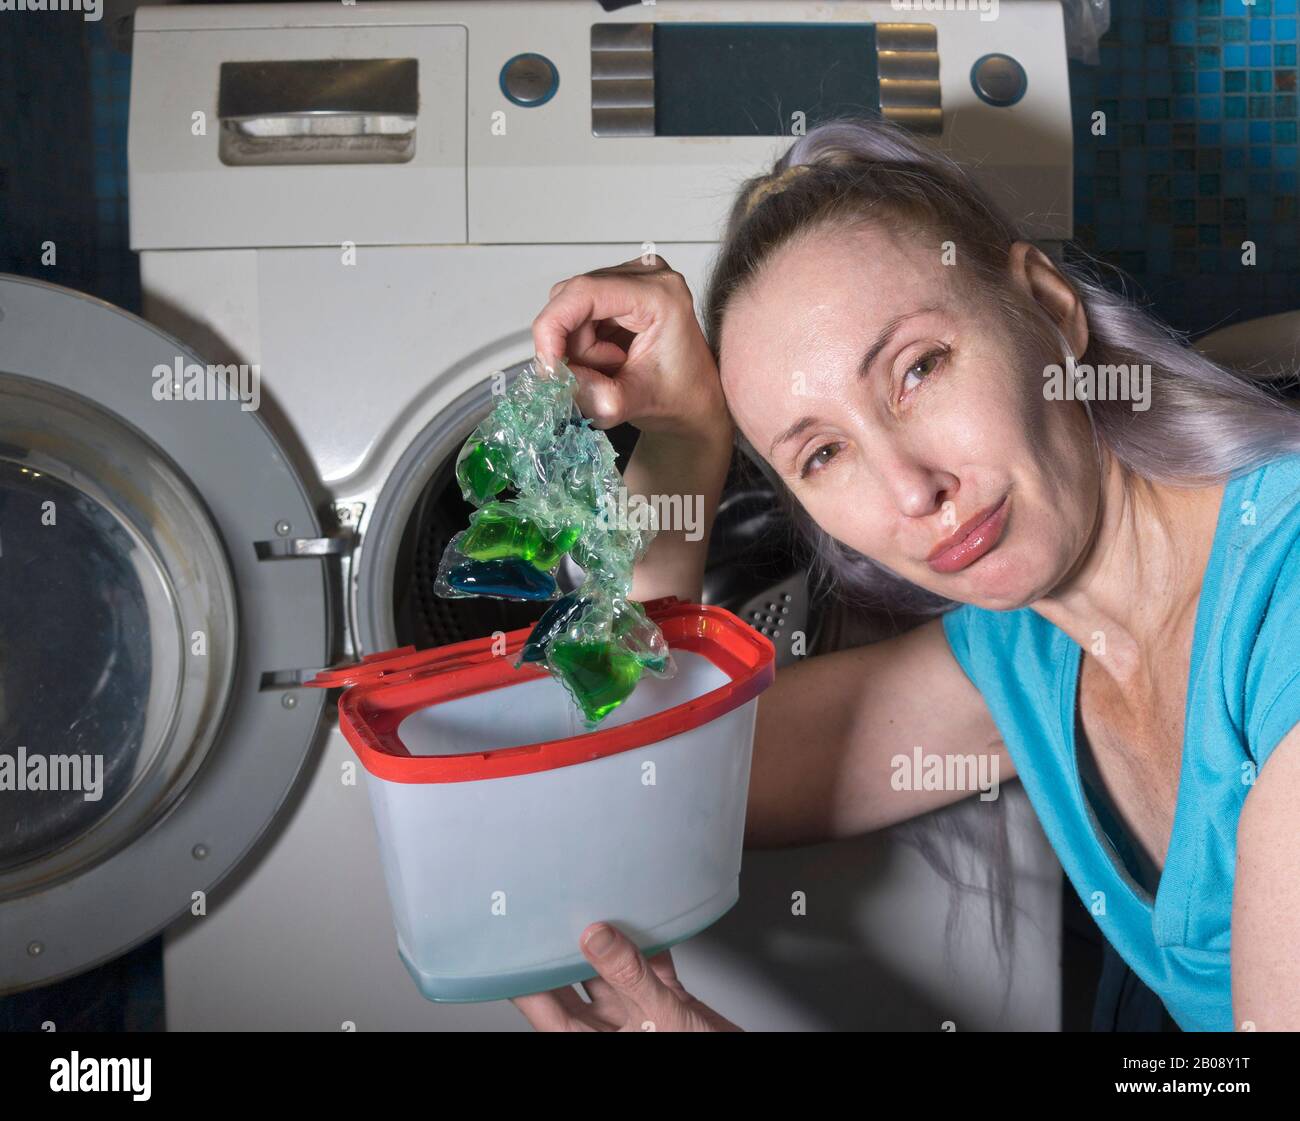 woman in the bathroom, next to the washing machine, takes out the defective washing gel stuck into one lump from the packaging and crying, photo from Stock Photo